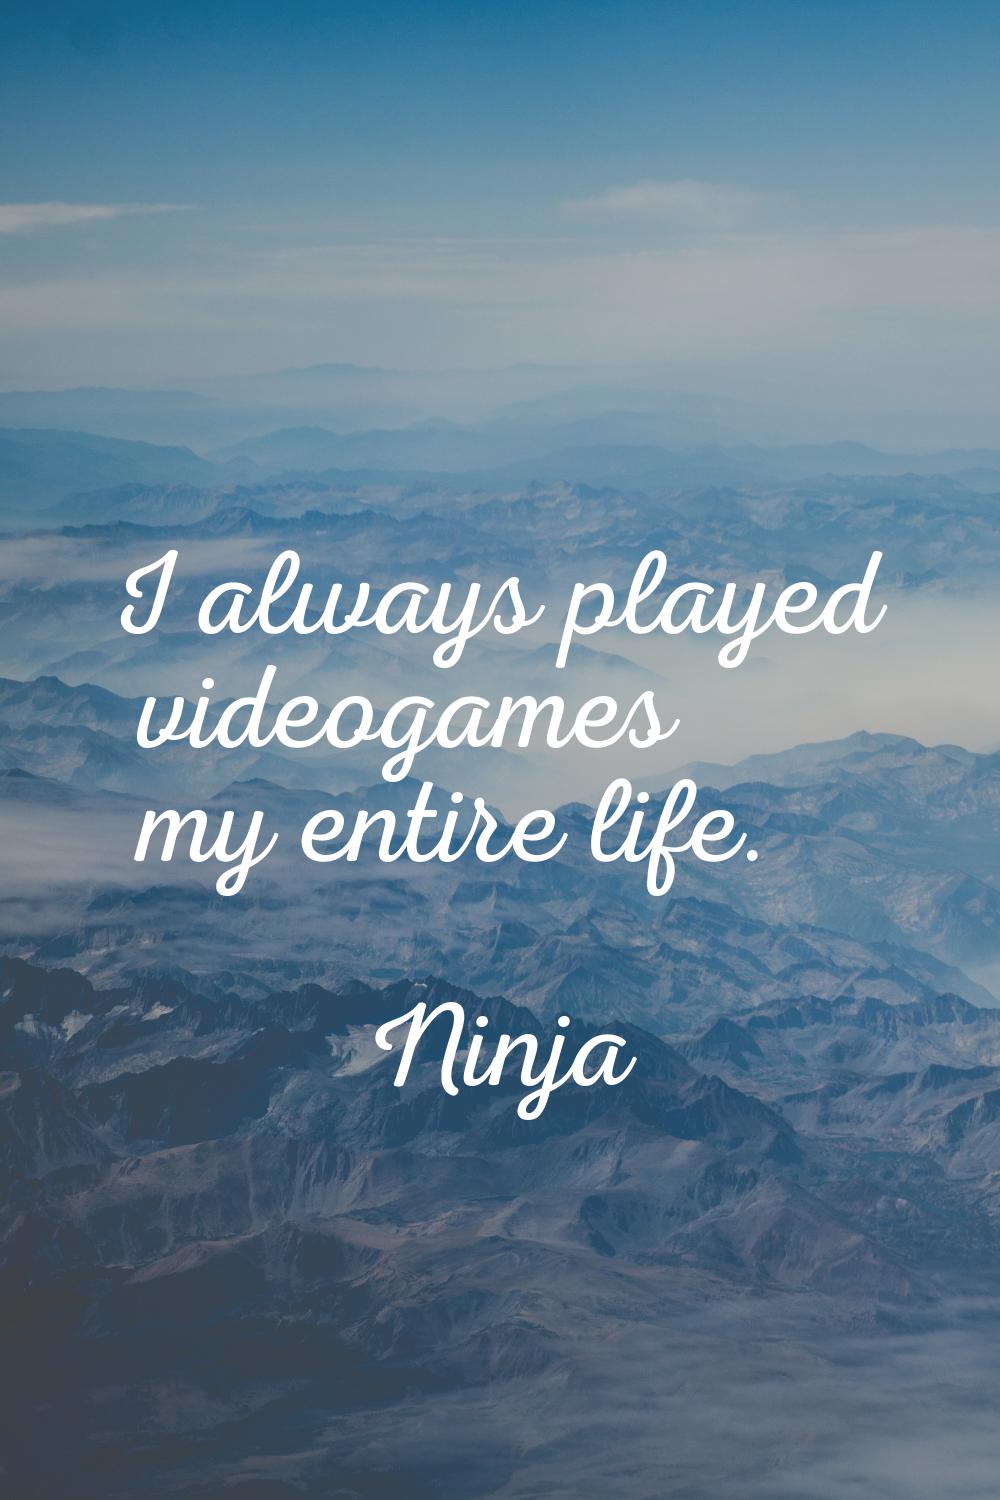 I always played videogames my entire life.